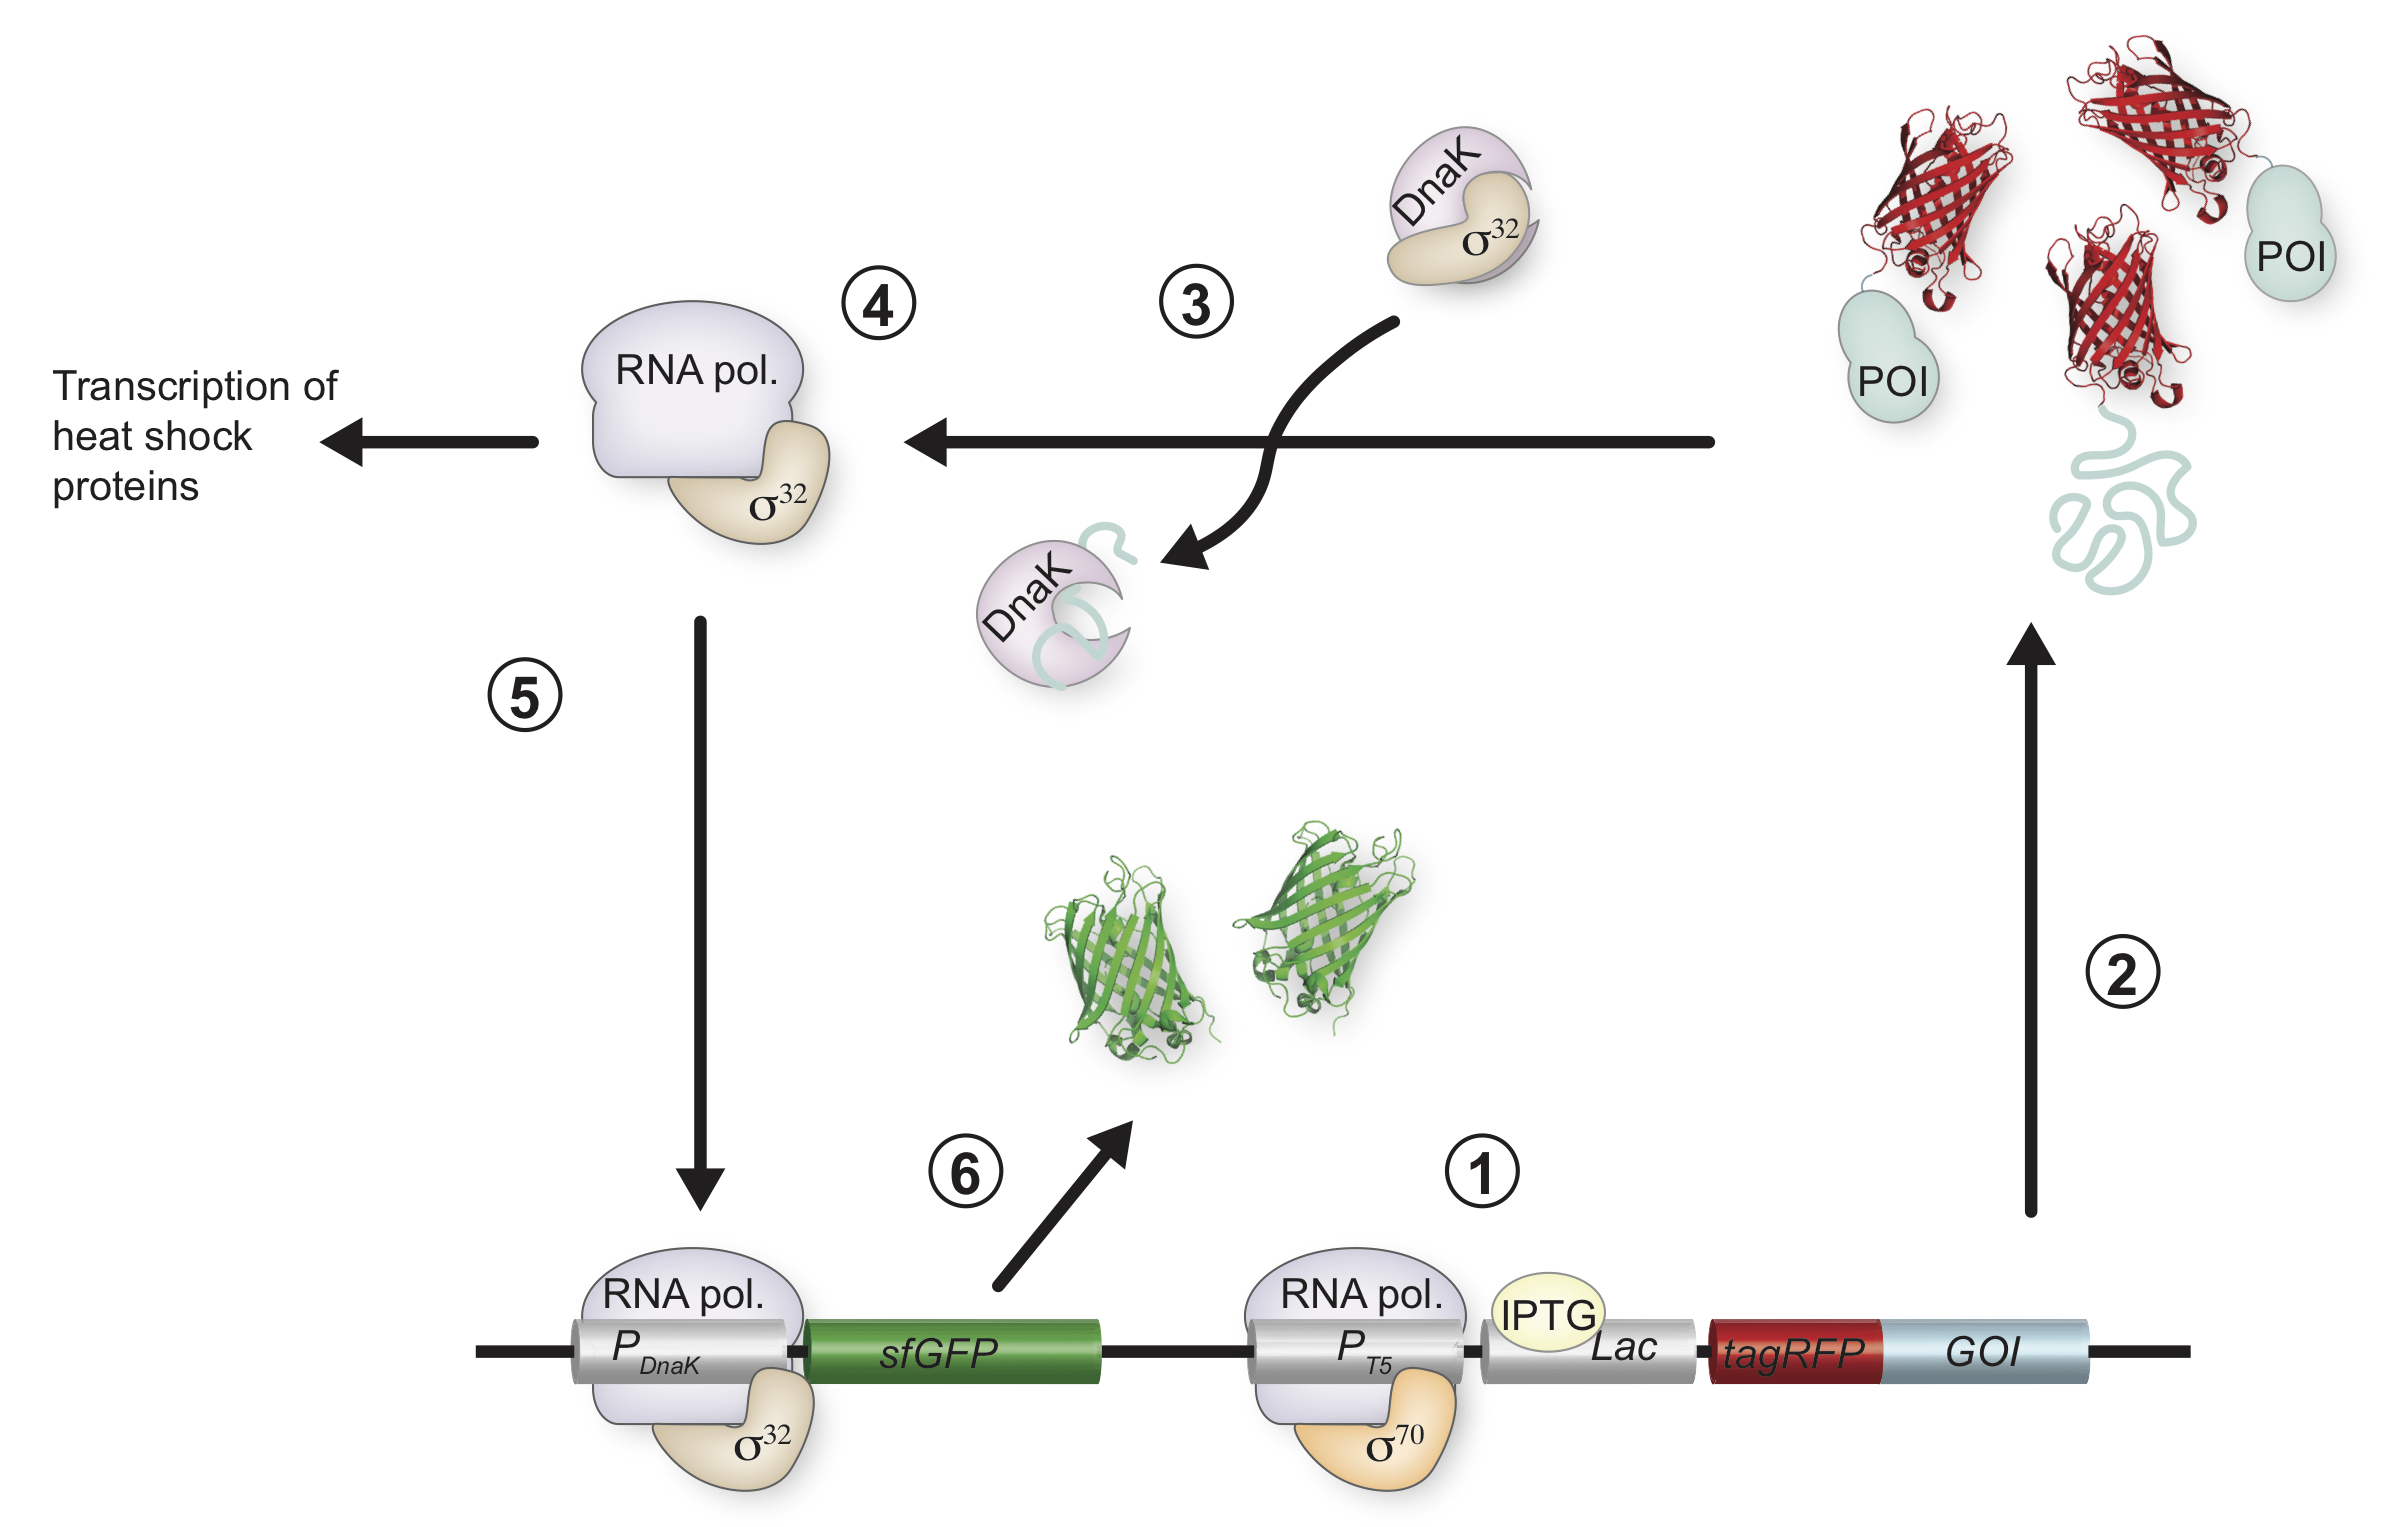 DnaK response to expression of protein mutants is dependent on translation rate and stability